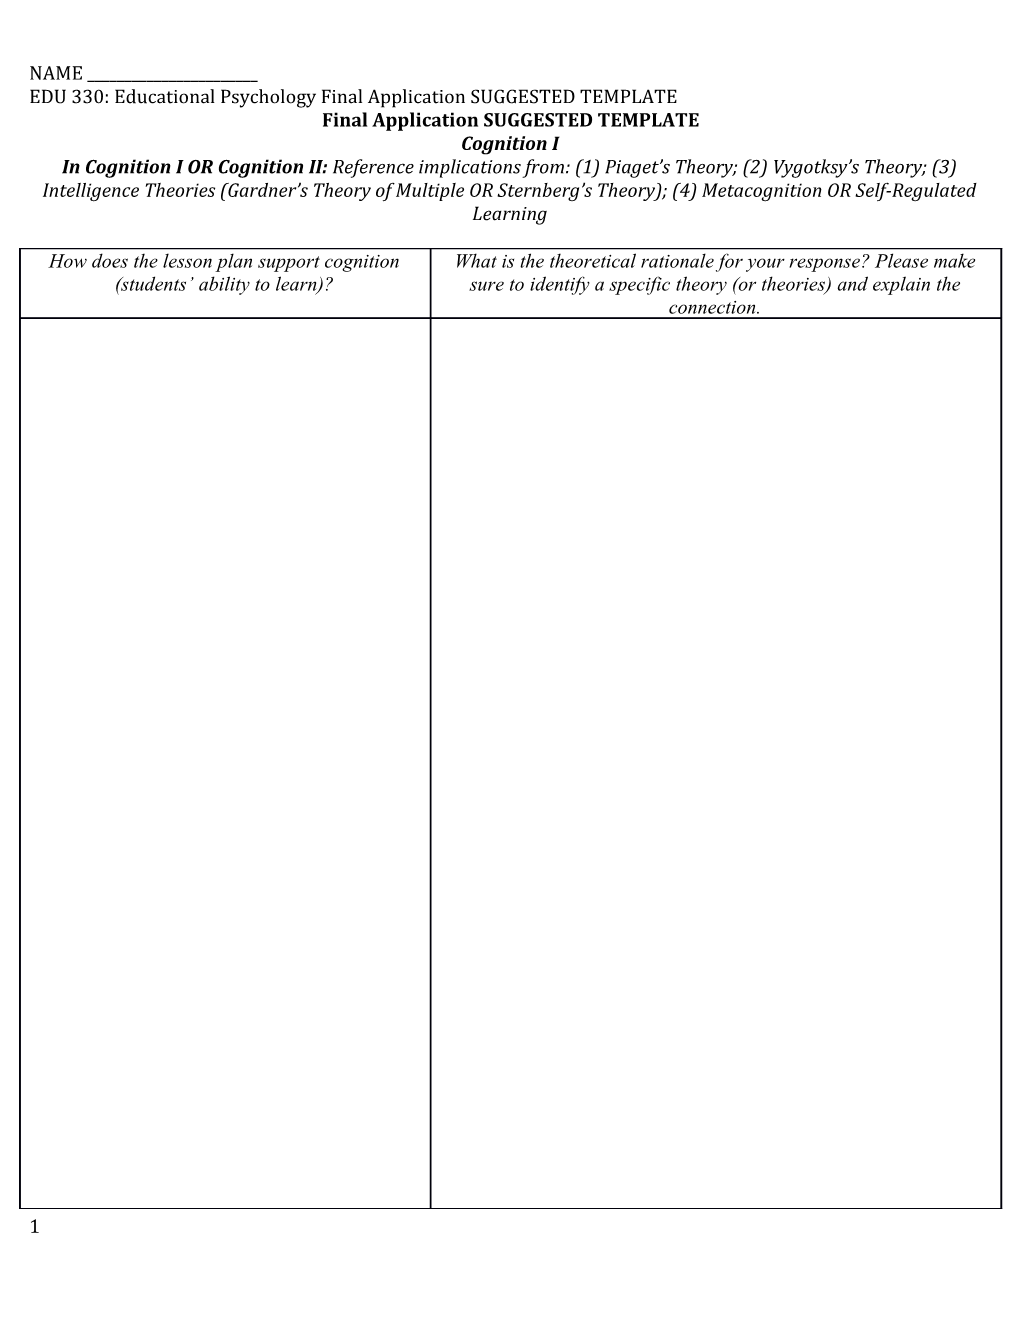 EDU 330: Educational Psychology Final Application SUGGESTED TEMPLATE